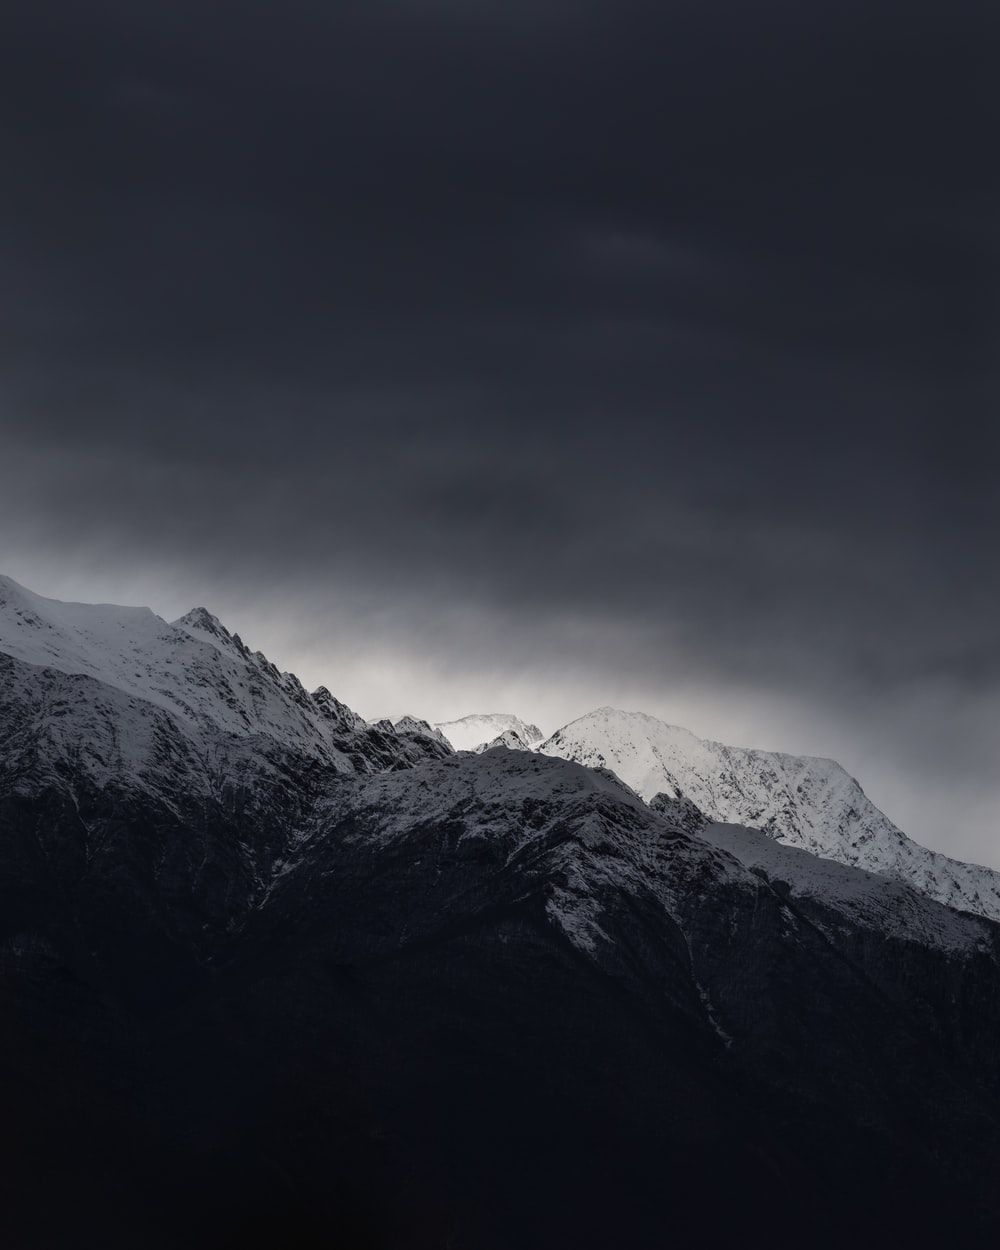 Dark Mountain Picture. Download Free Image